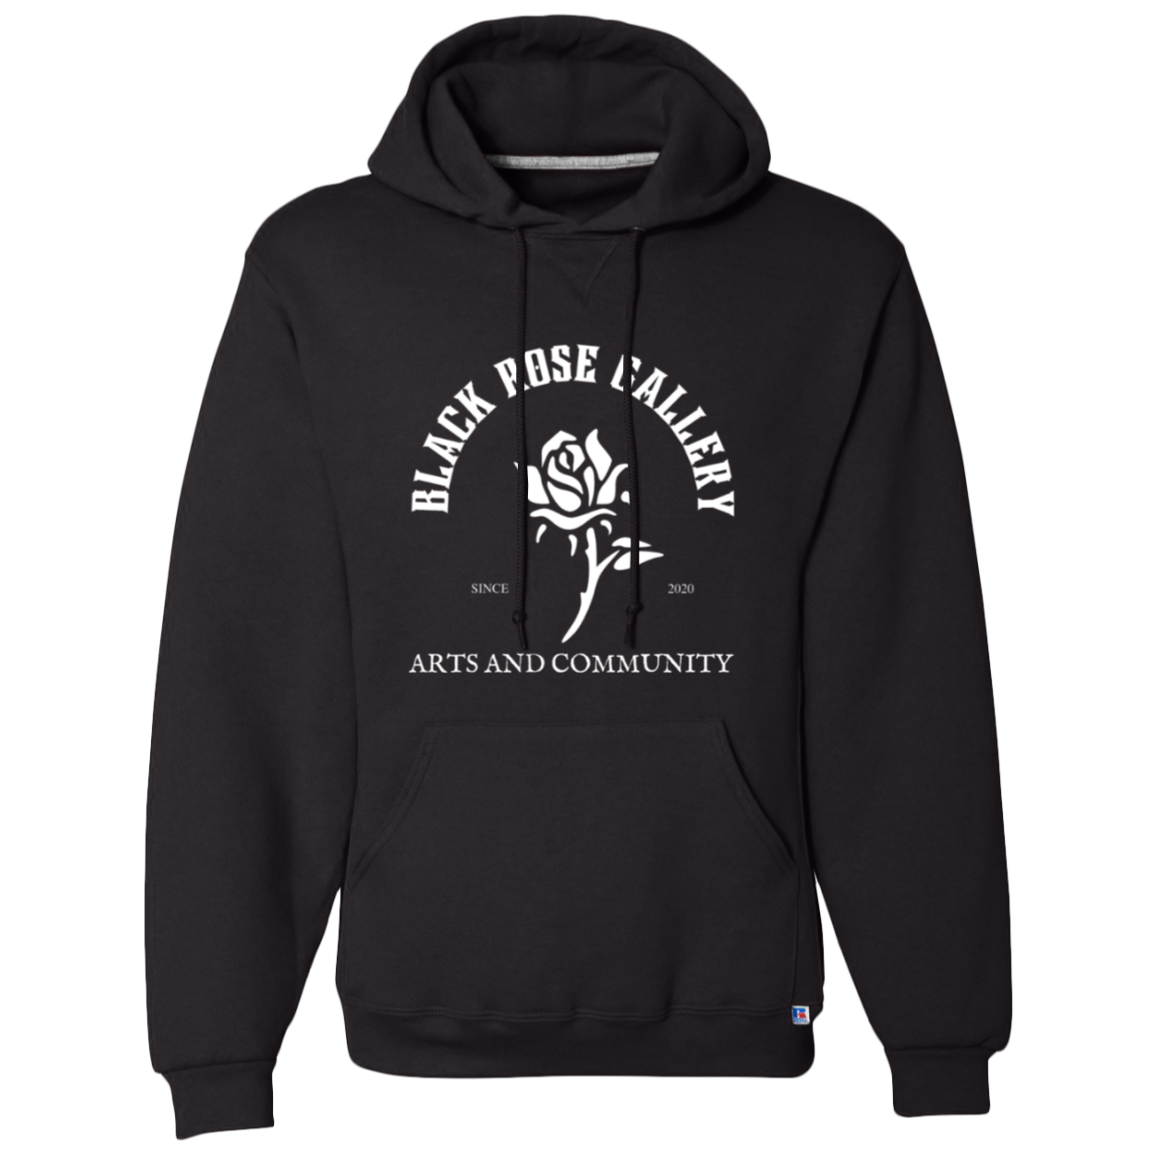 ALL DAY HOODIE